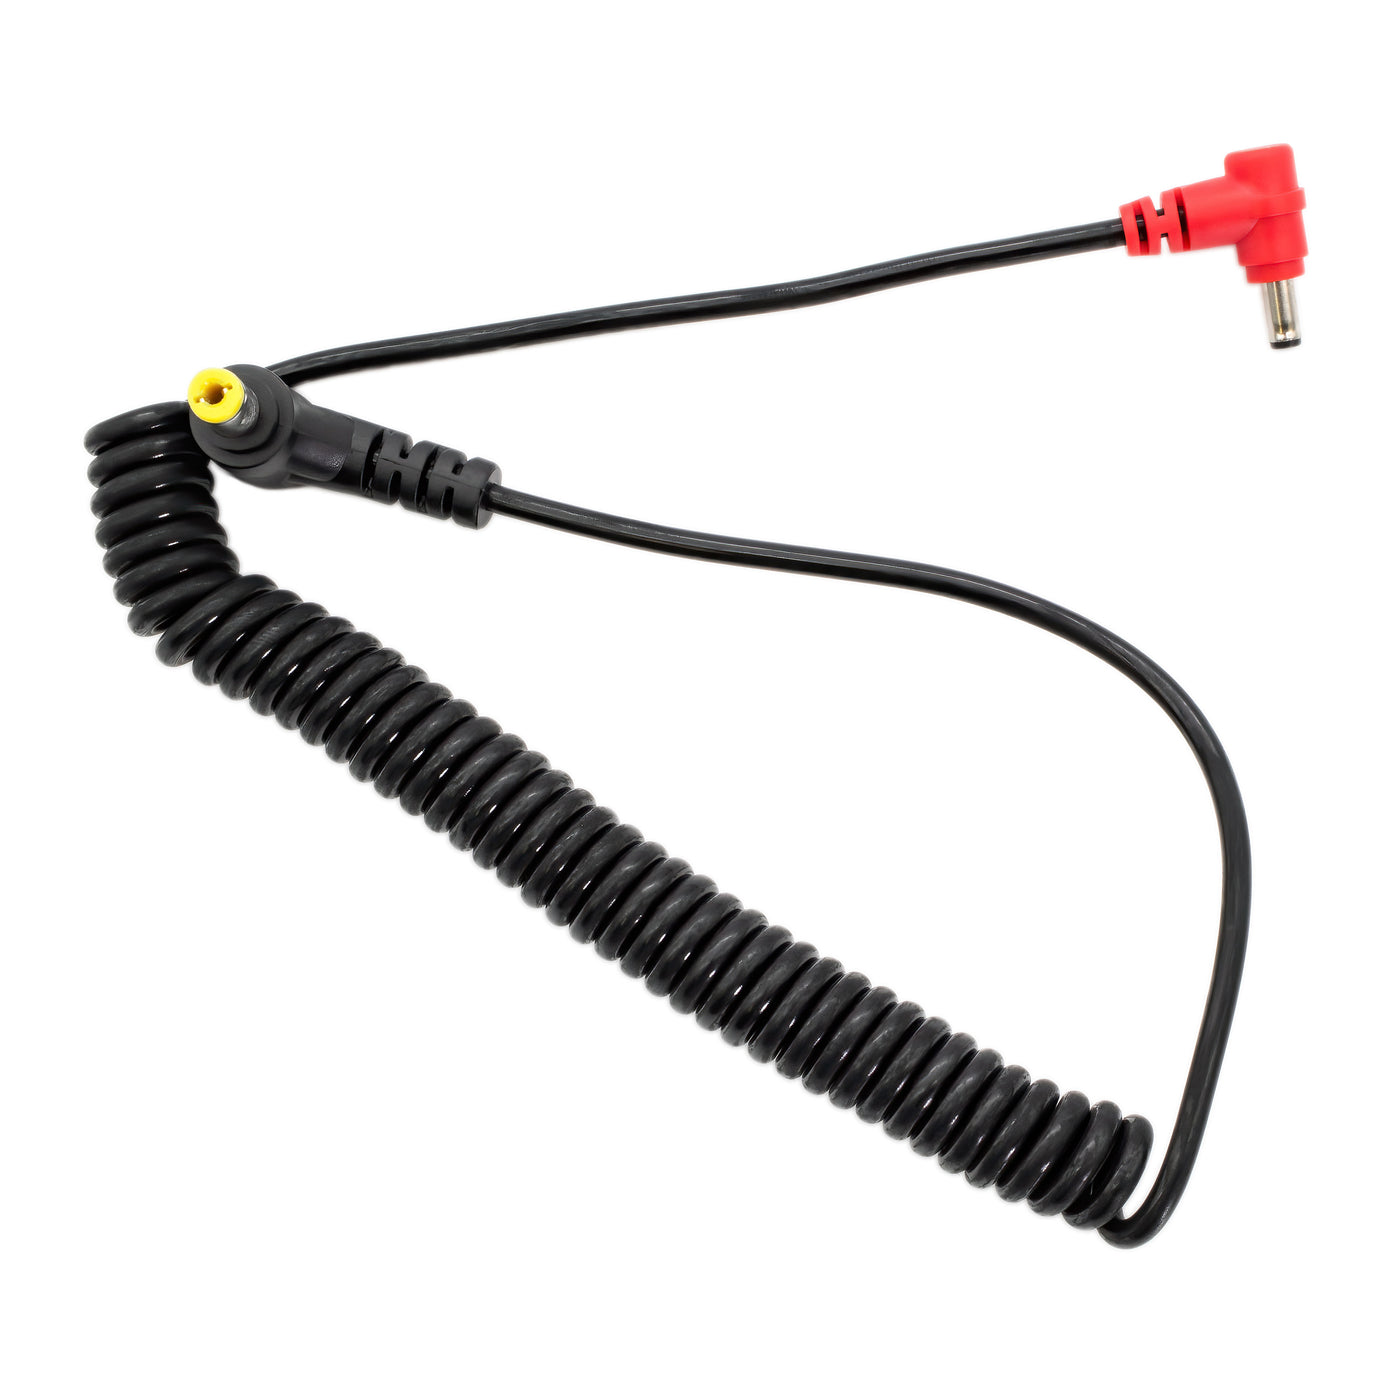 1.35/3.5 DC to 2.1/5.5 DC Male Coiled Power Cable